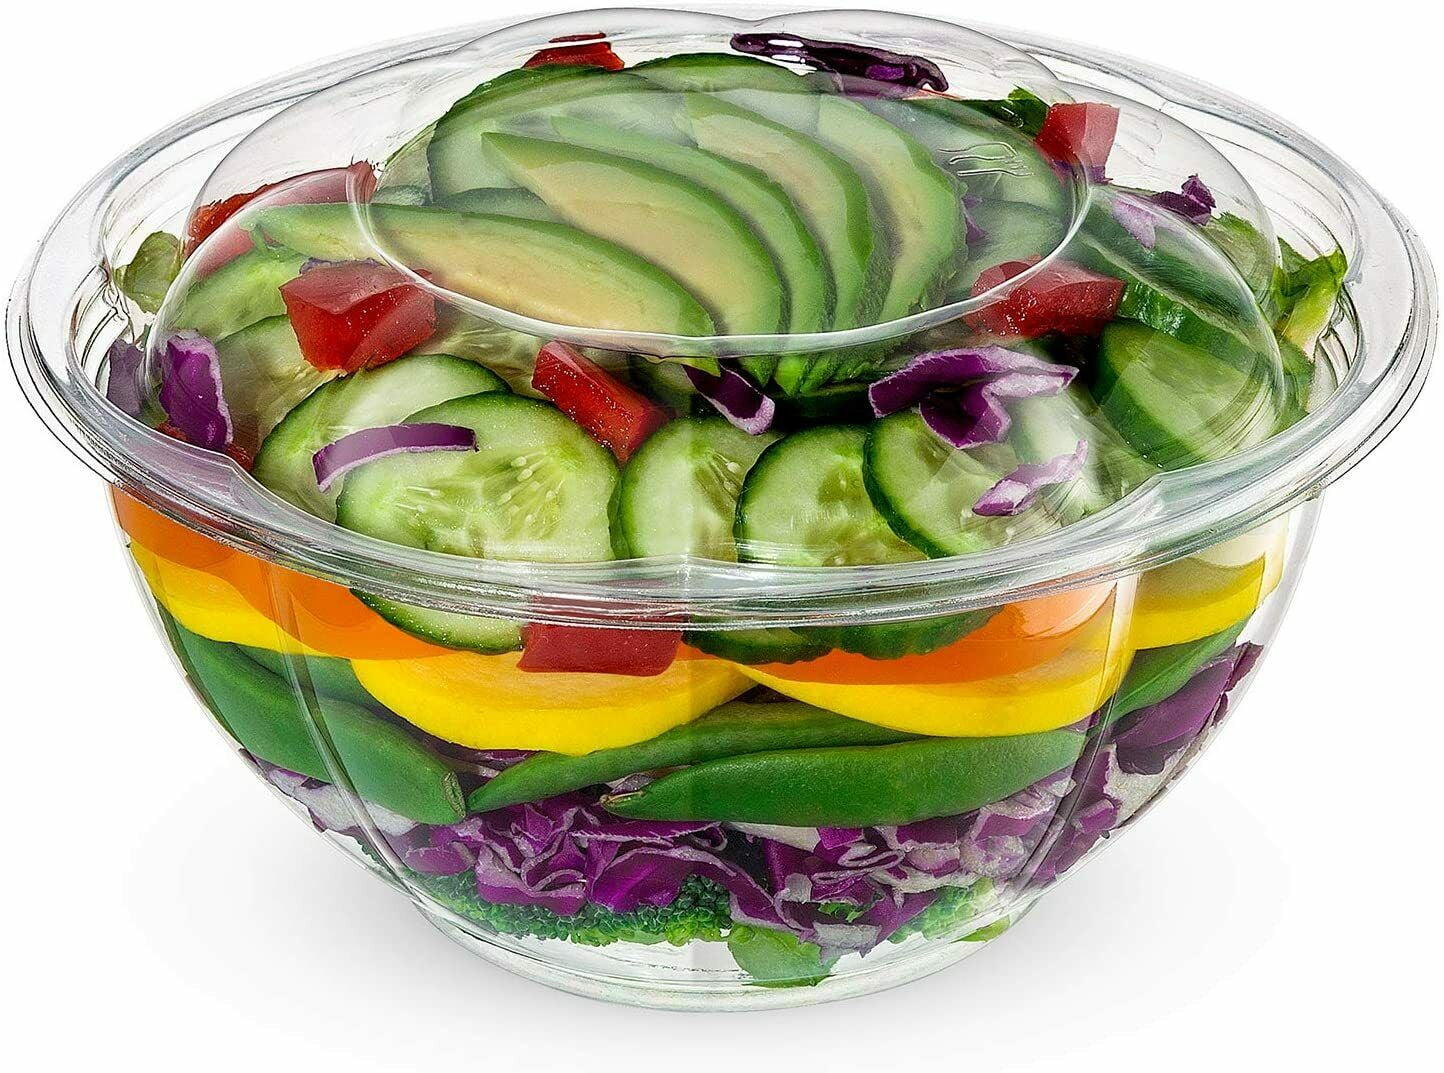 Stock Your Home 24oz Clear Plastic Salad Bowls with Lids Disposable (50 Pack) Small Takeout Container with Snap on Lid for Fruit Salads, Quinoa